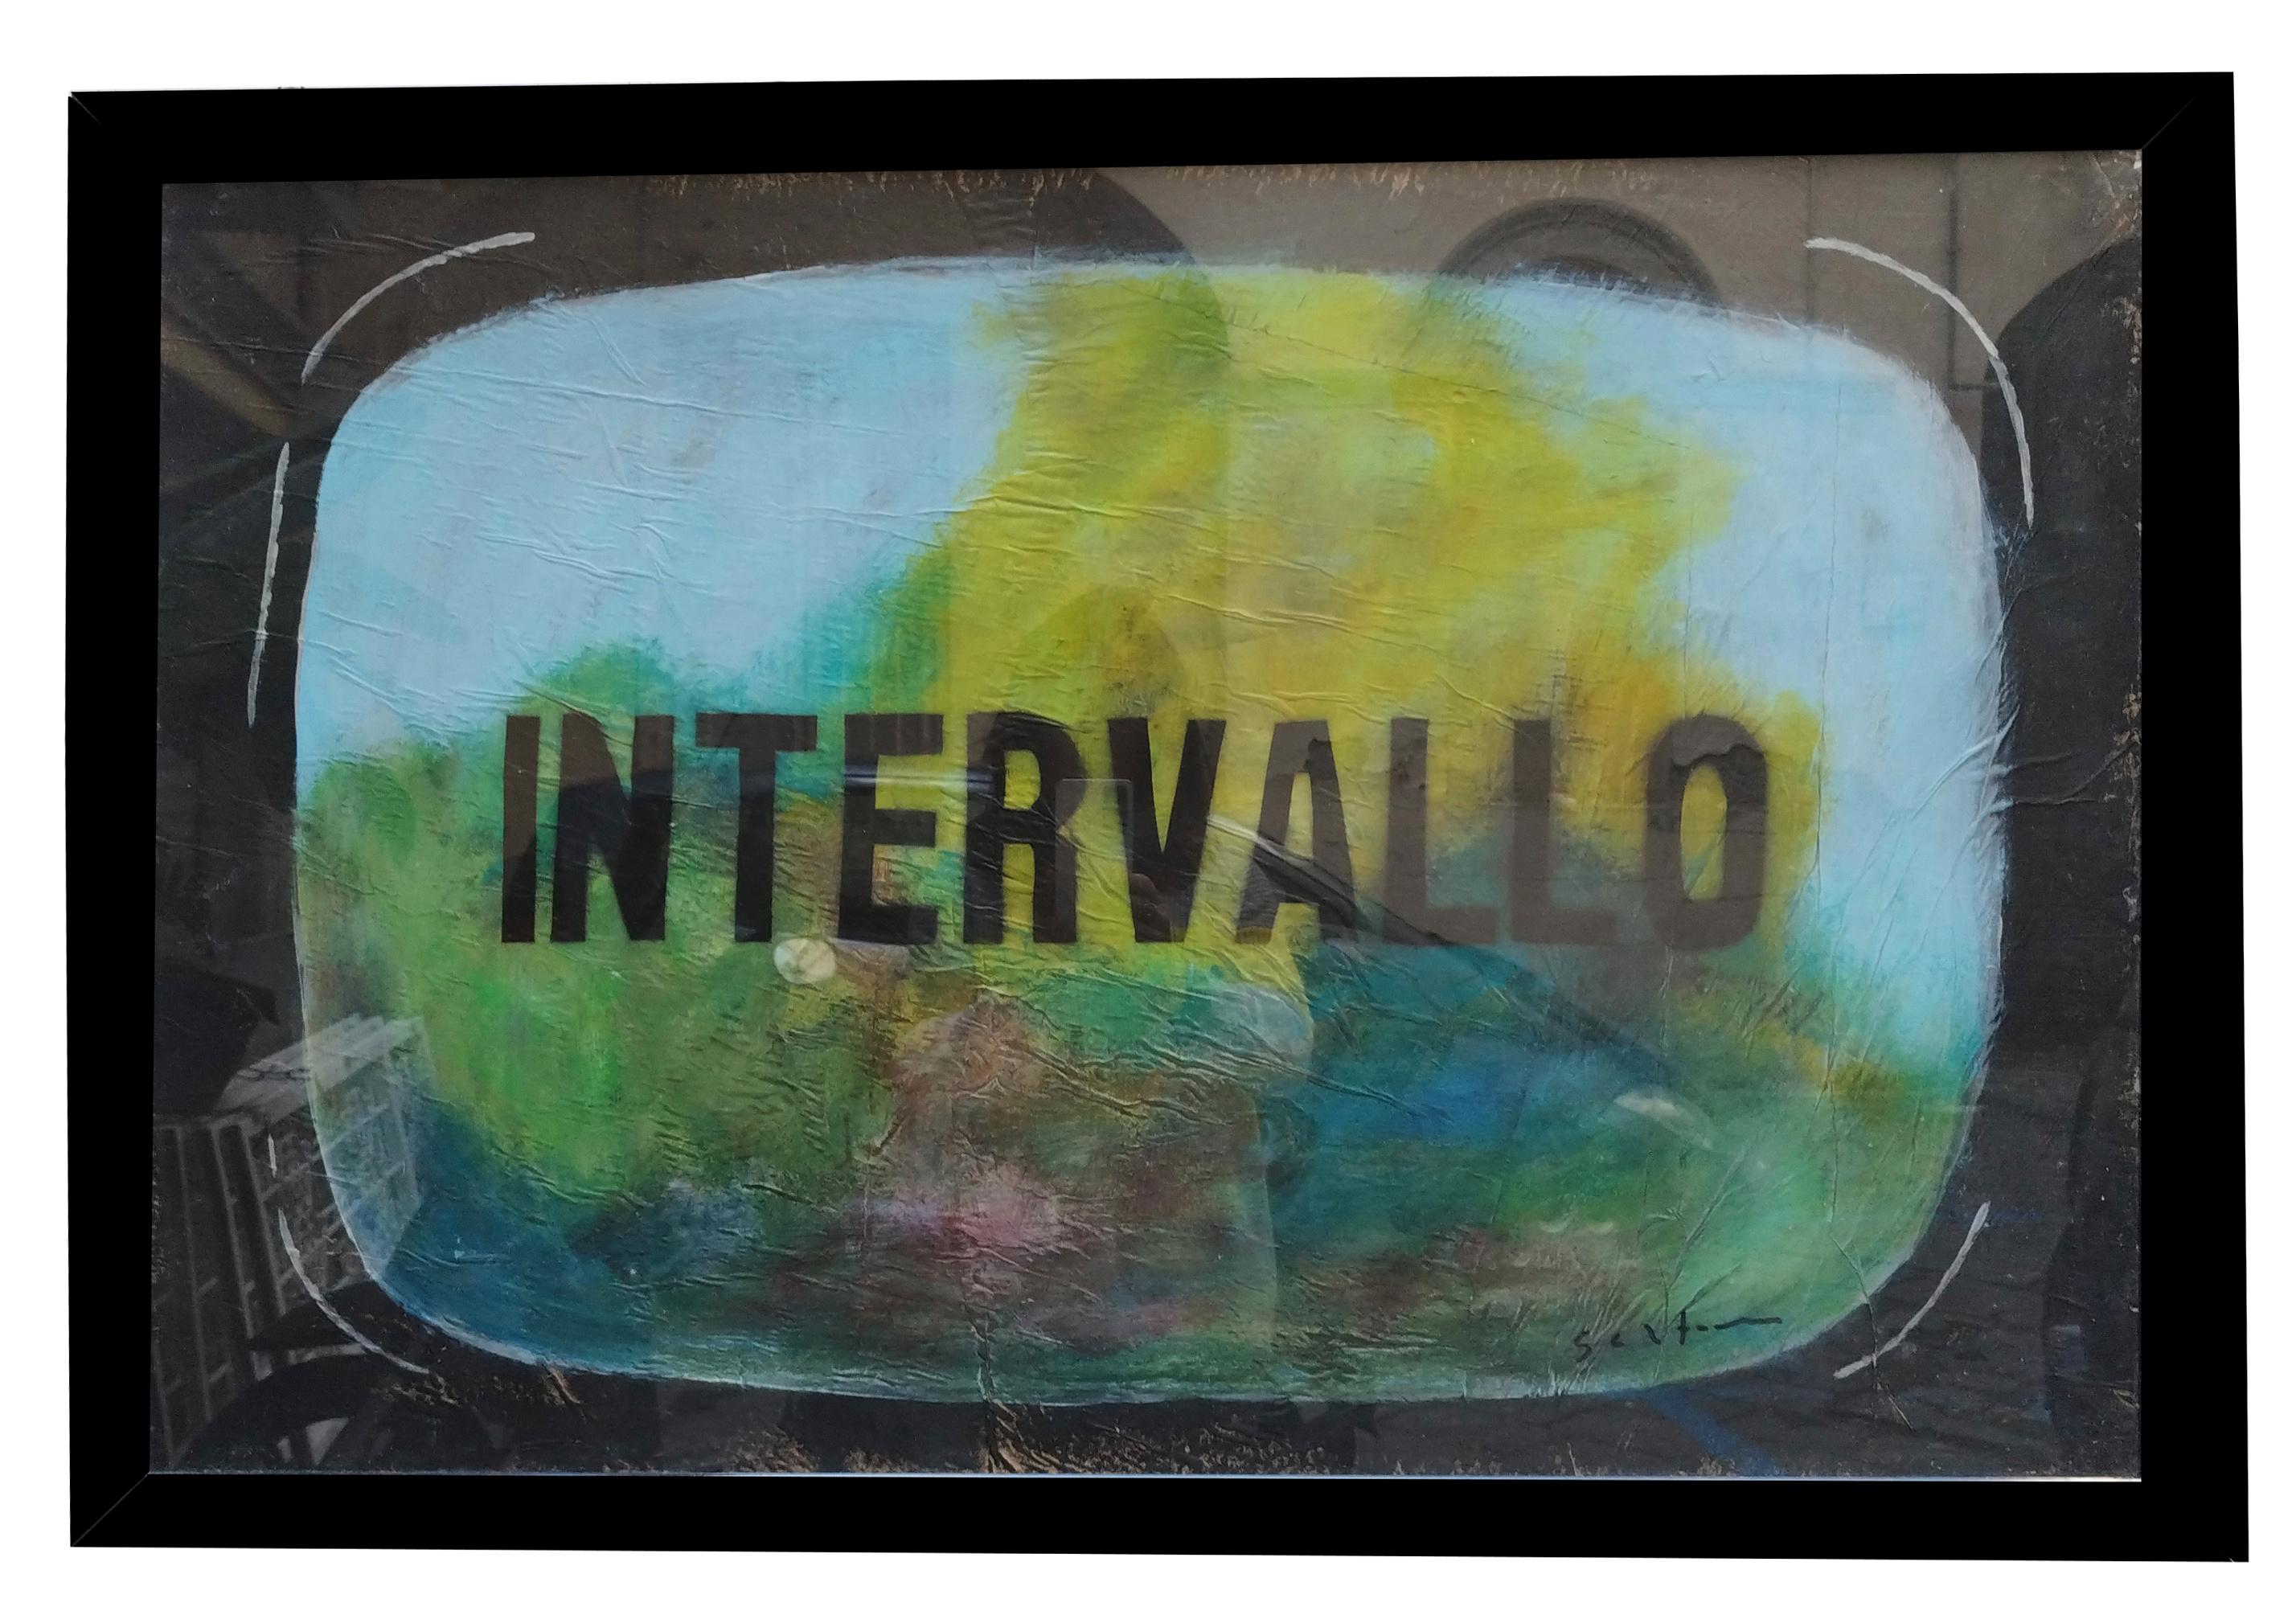 INTERVAL - Homage to Mario Schifano - Mixed Media Art by Unknown